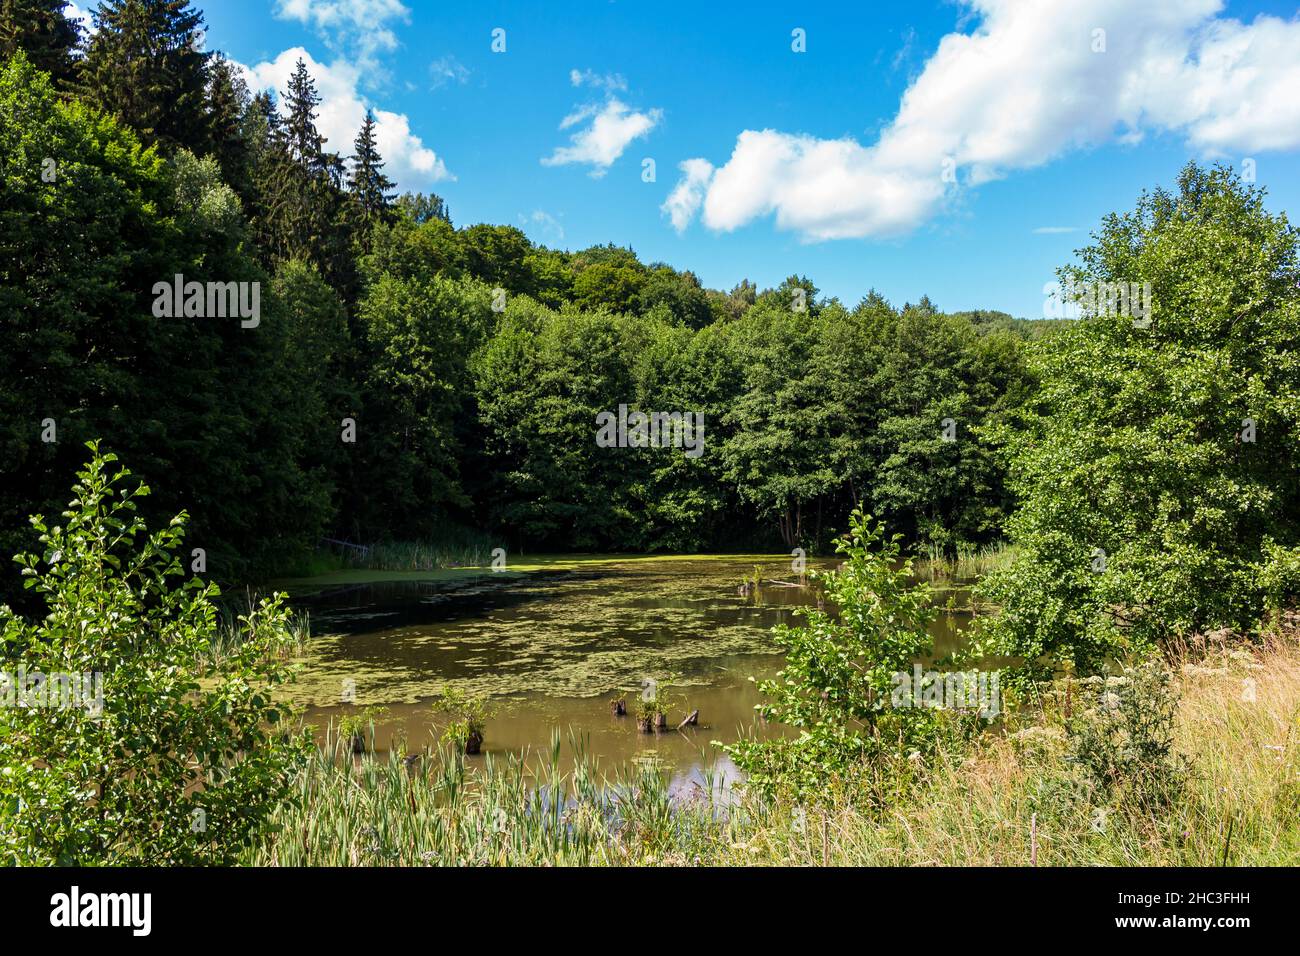 A swampy old pond in a picturesque wilderness area Stock Photo